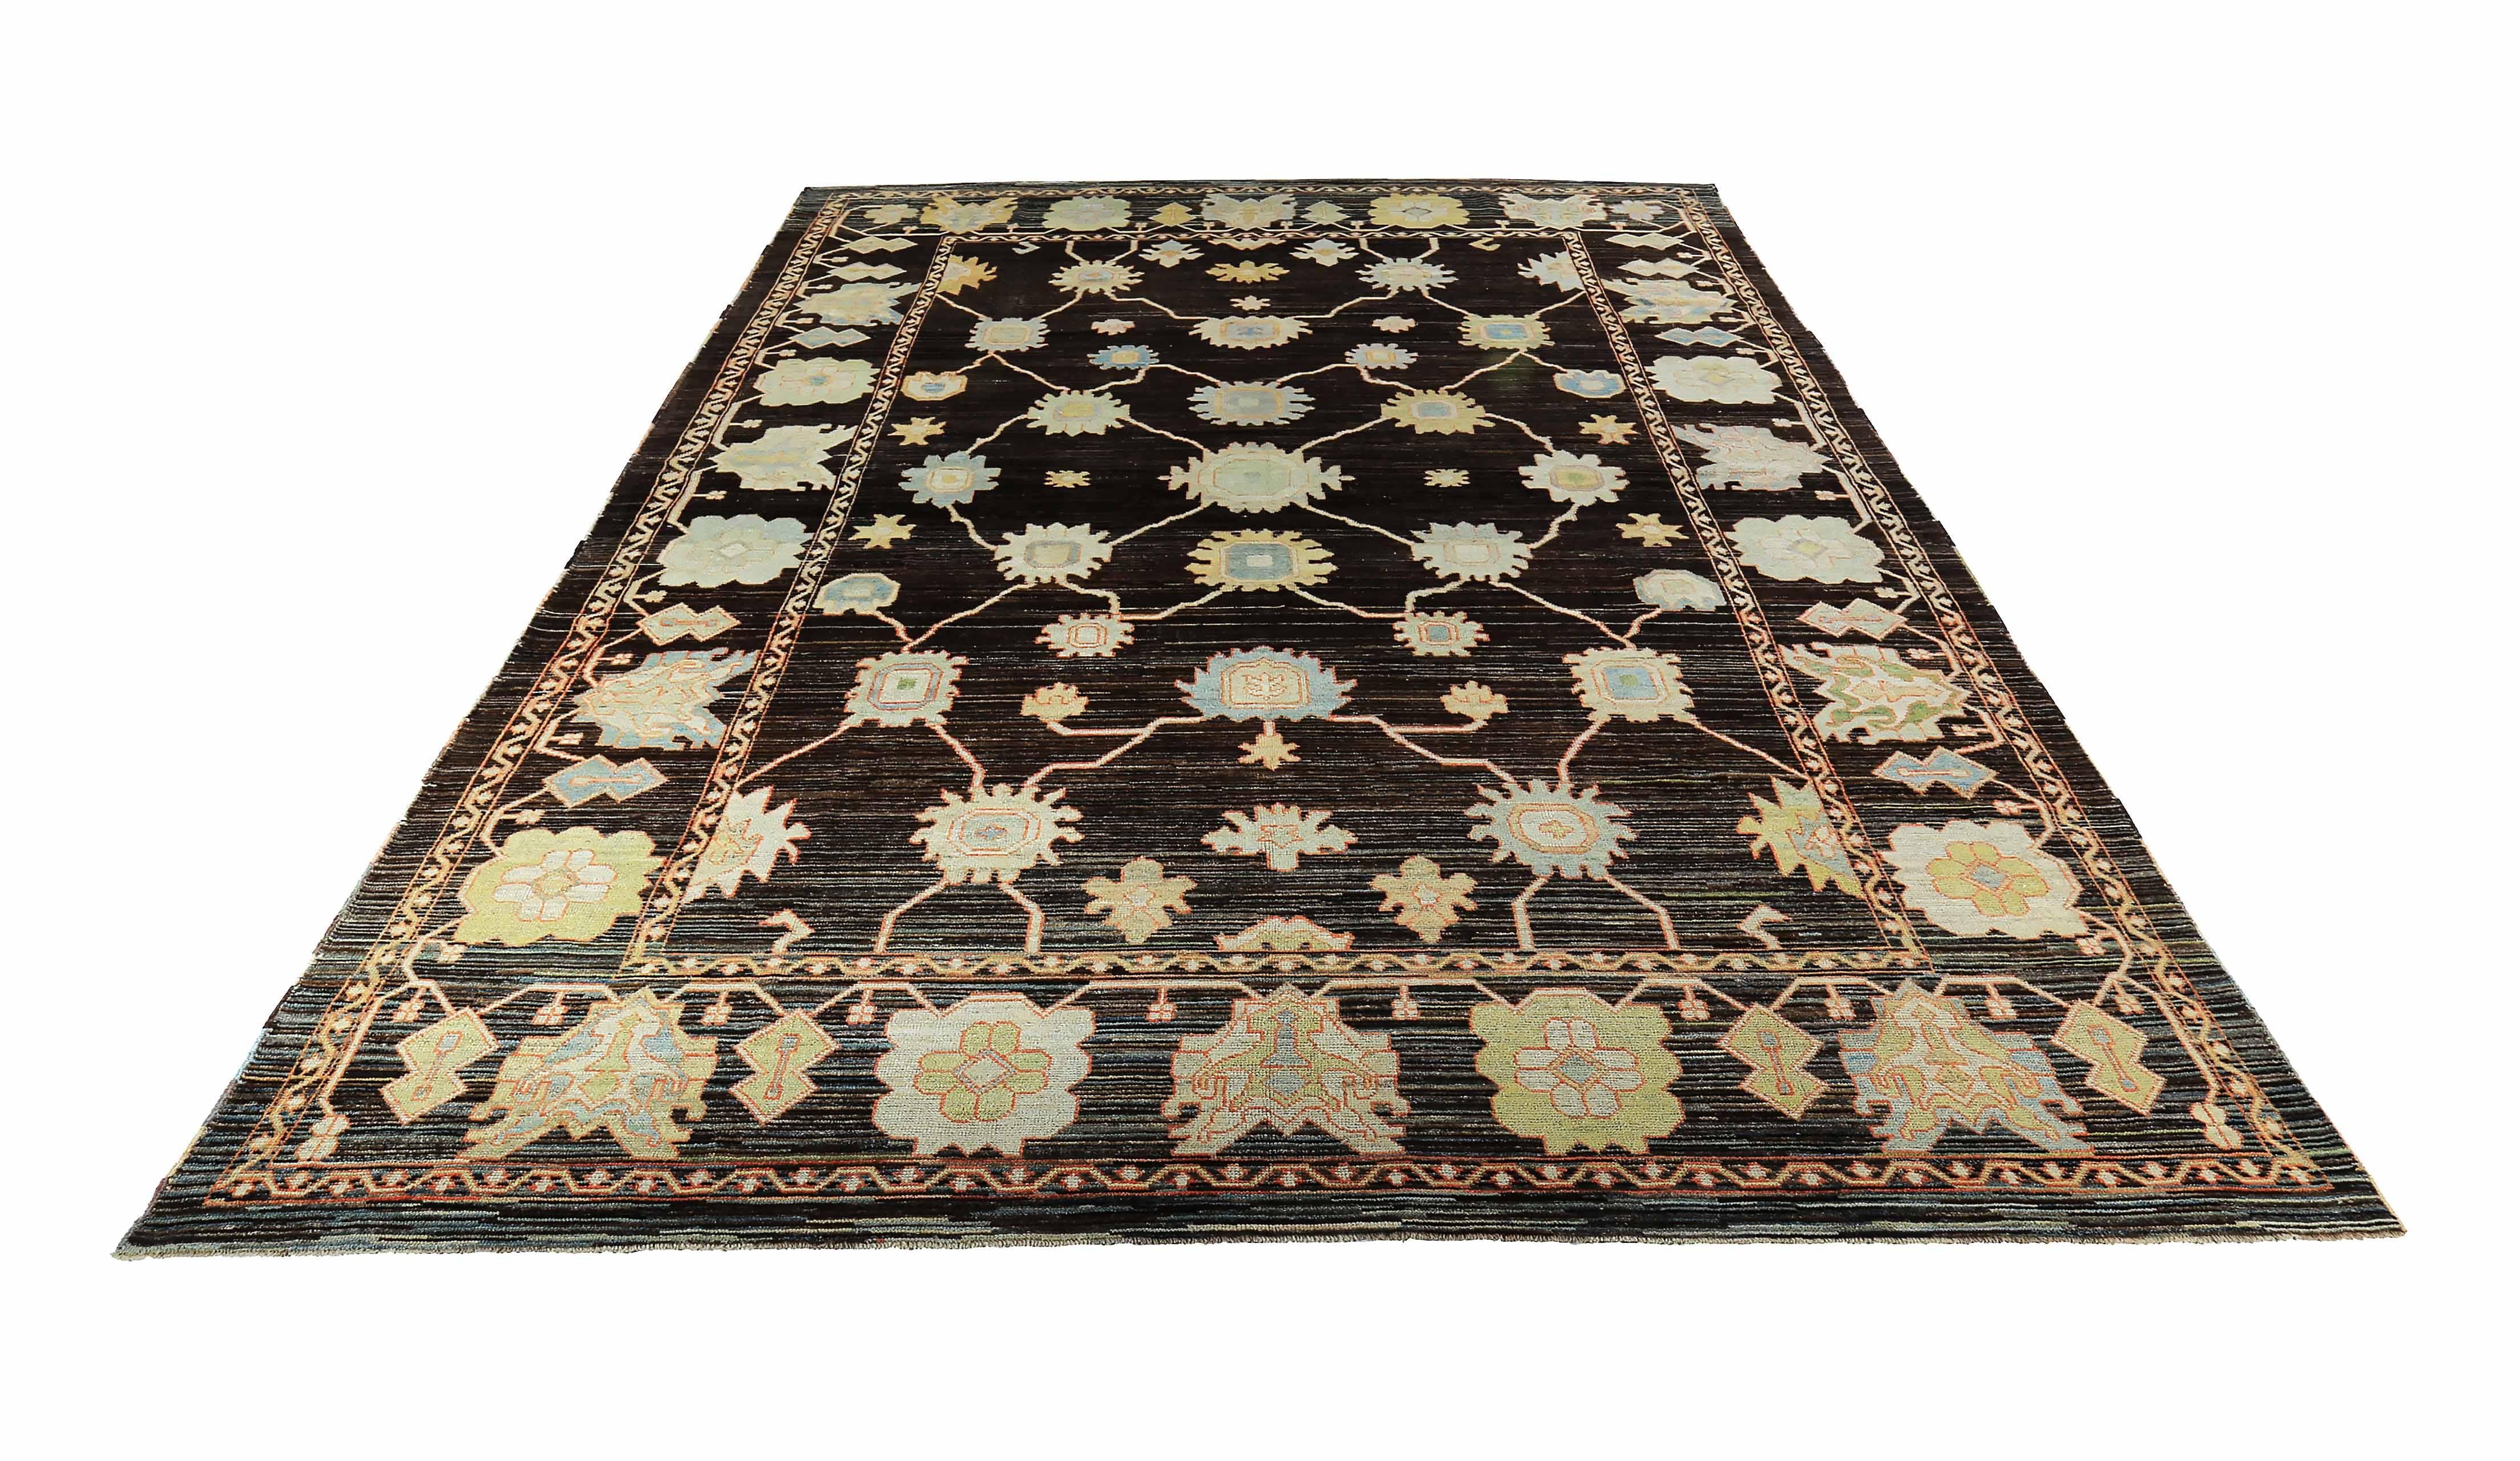 New Turkish rug made of handwoven sheep’s wool of the finest quality. It’s colored with organic vegetable dyes that are certified safe for humans and pets alike. It features green and light blue floral details on a rich brown field with hints of